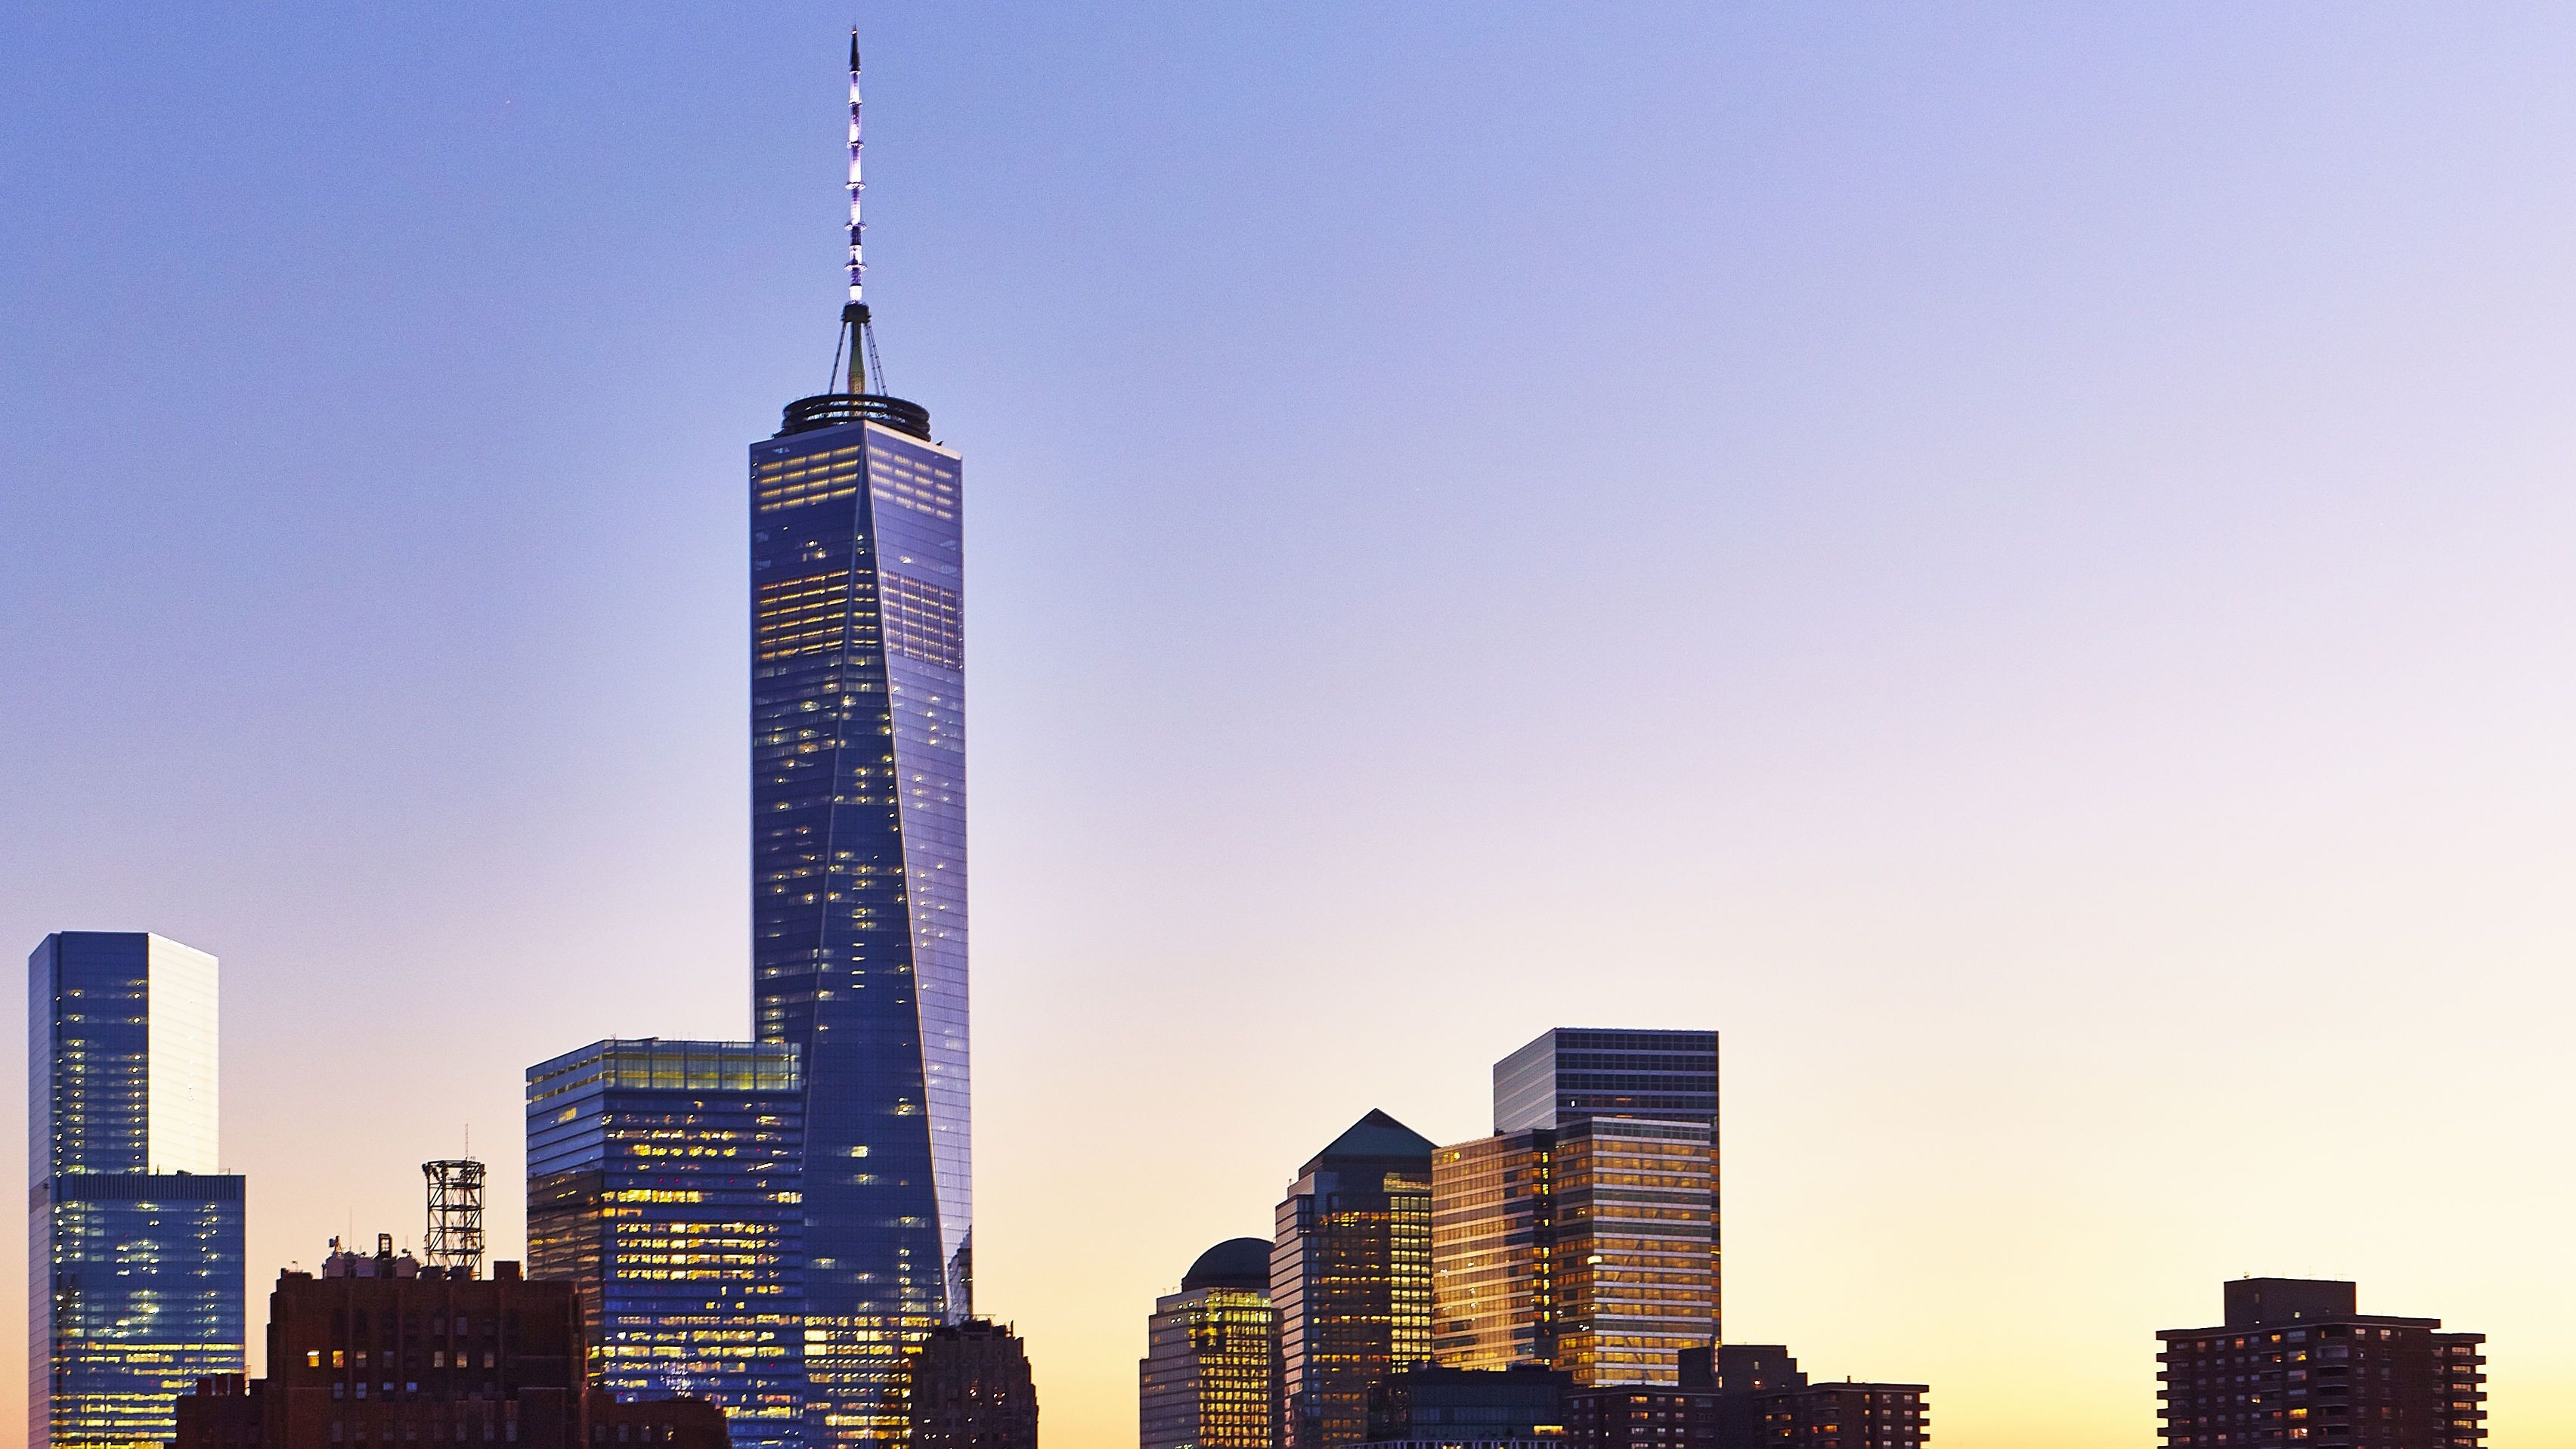 One World Trade Center - Twin Towers Next To One World Trade Center - HD Wallpaper 